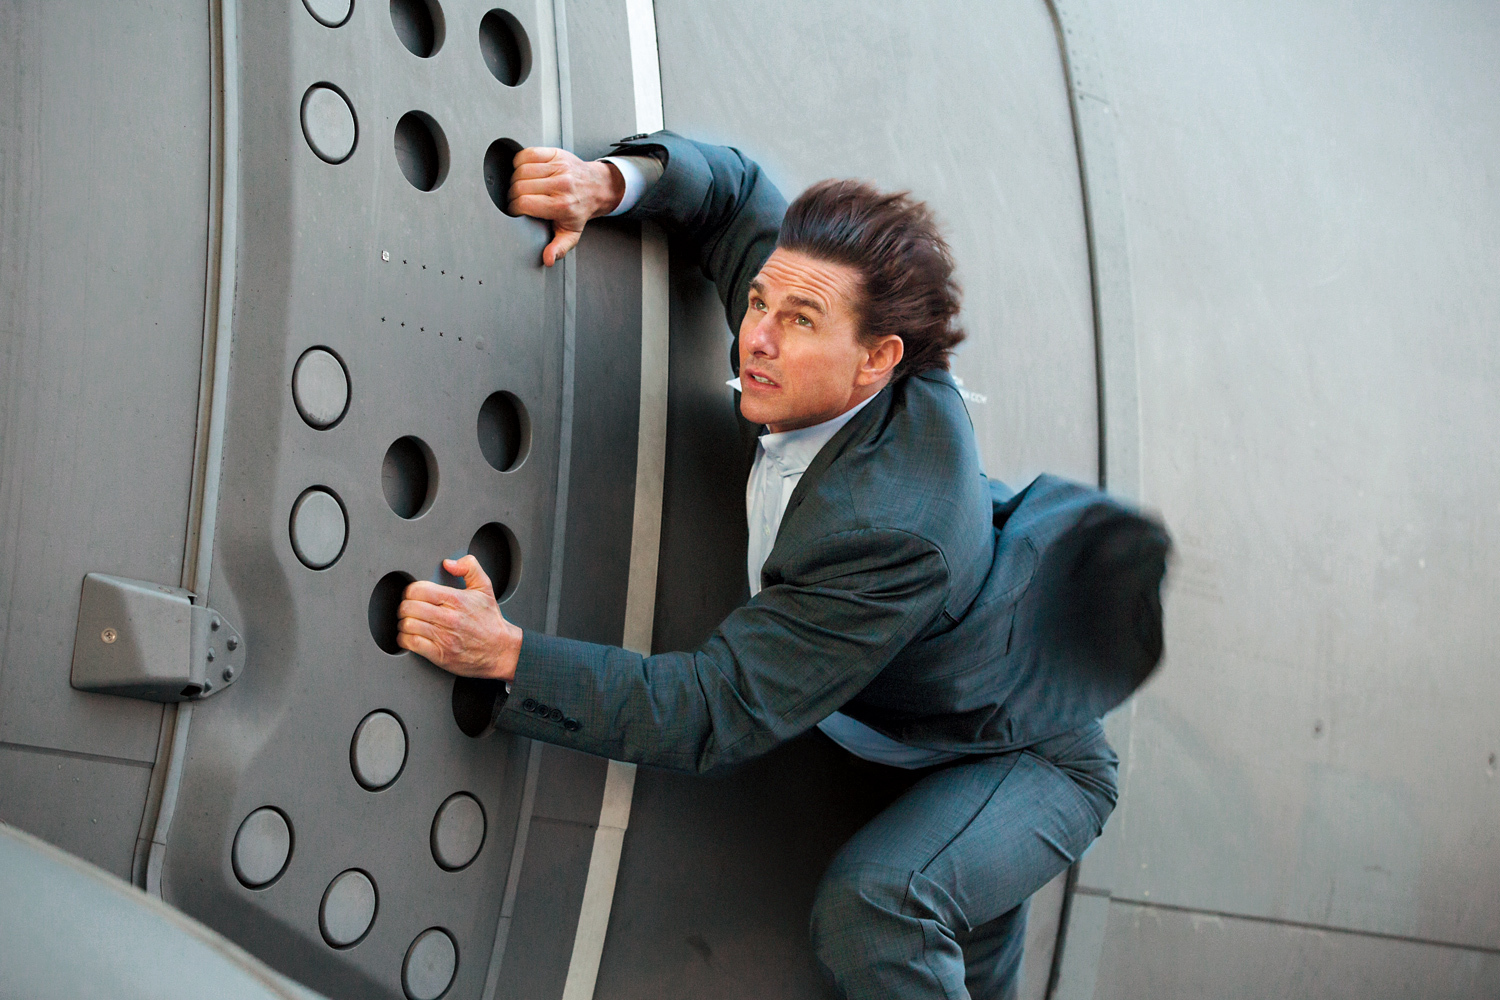 Mission impossible : Rogue Nation